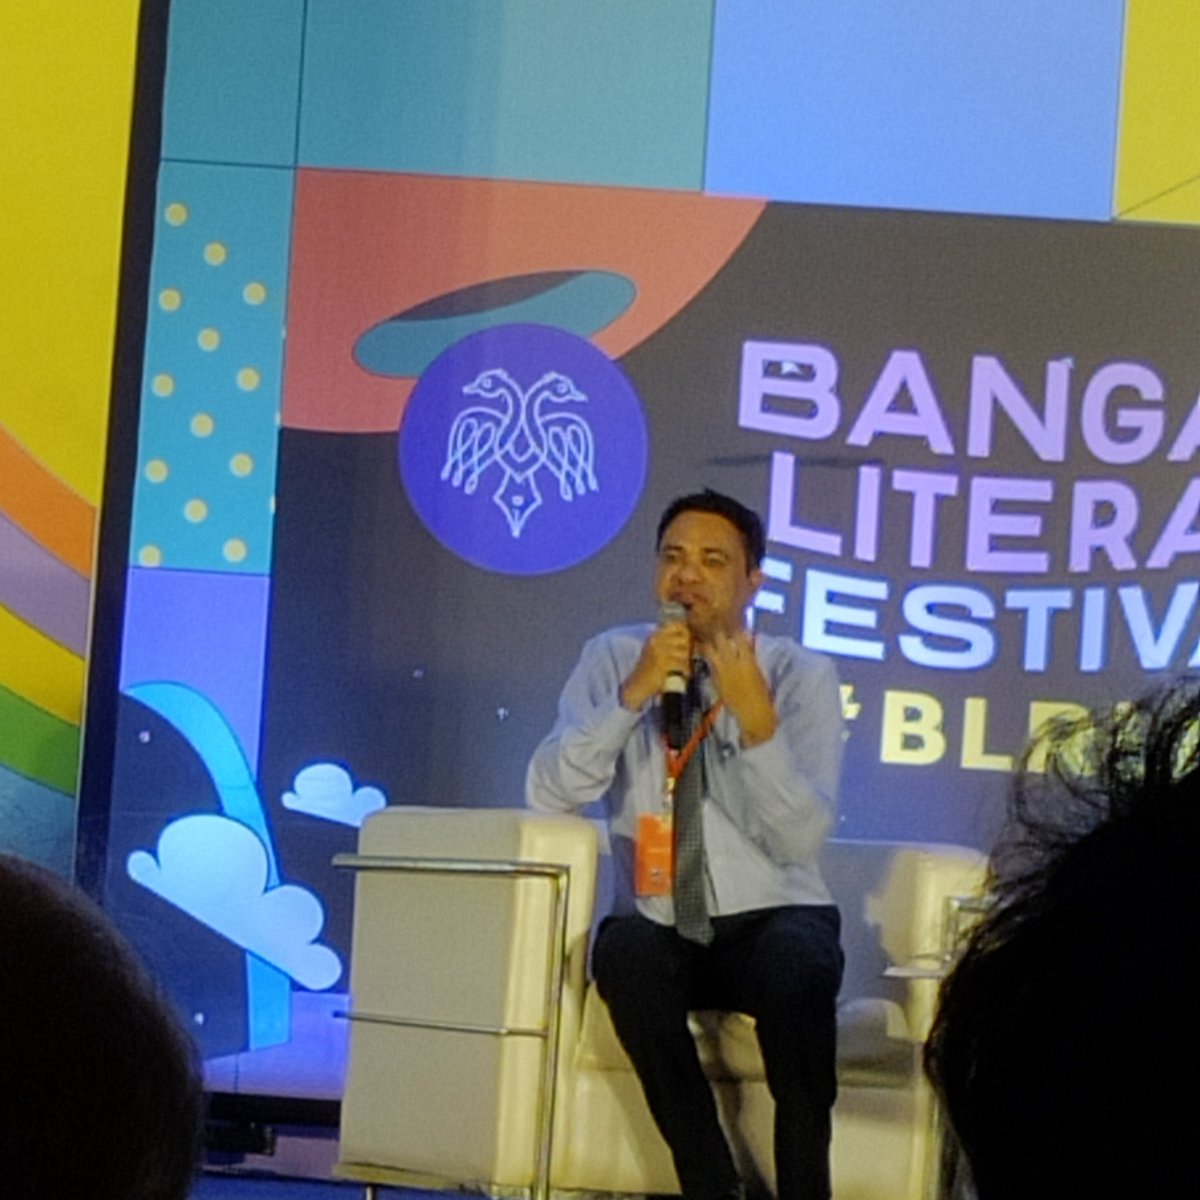 So honoured to be at the packed session of Dr. #KafeelKhan at the #BangaloreLiteratureFestival and have him mention my name!